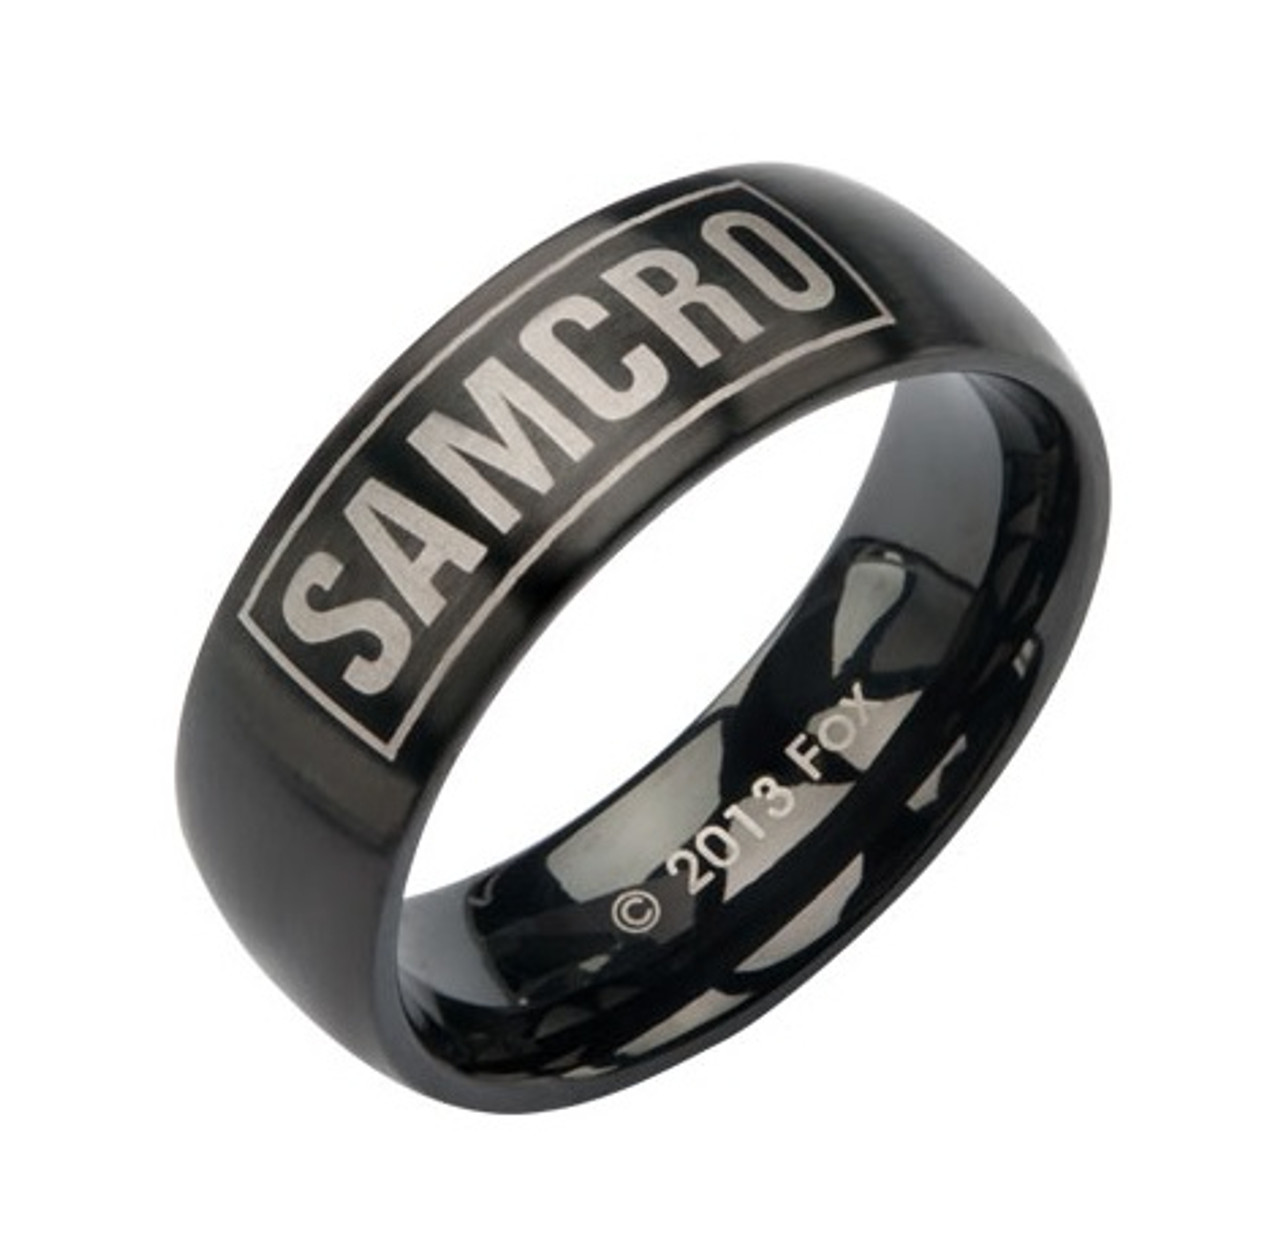 sons of anarchy samcro black ring 5 15948.1512277951